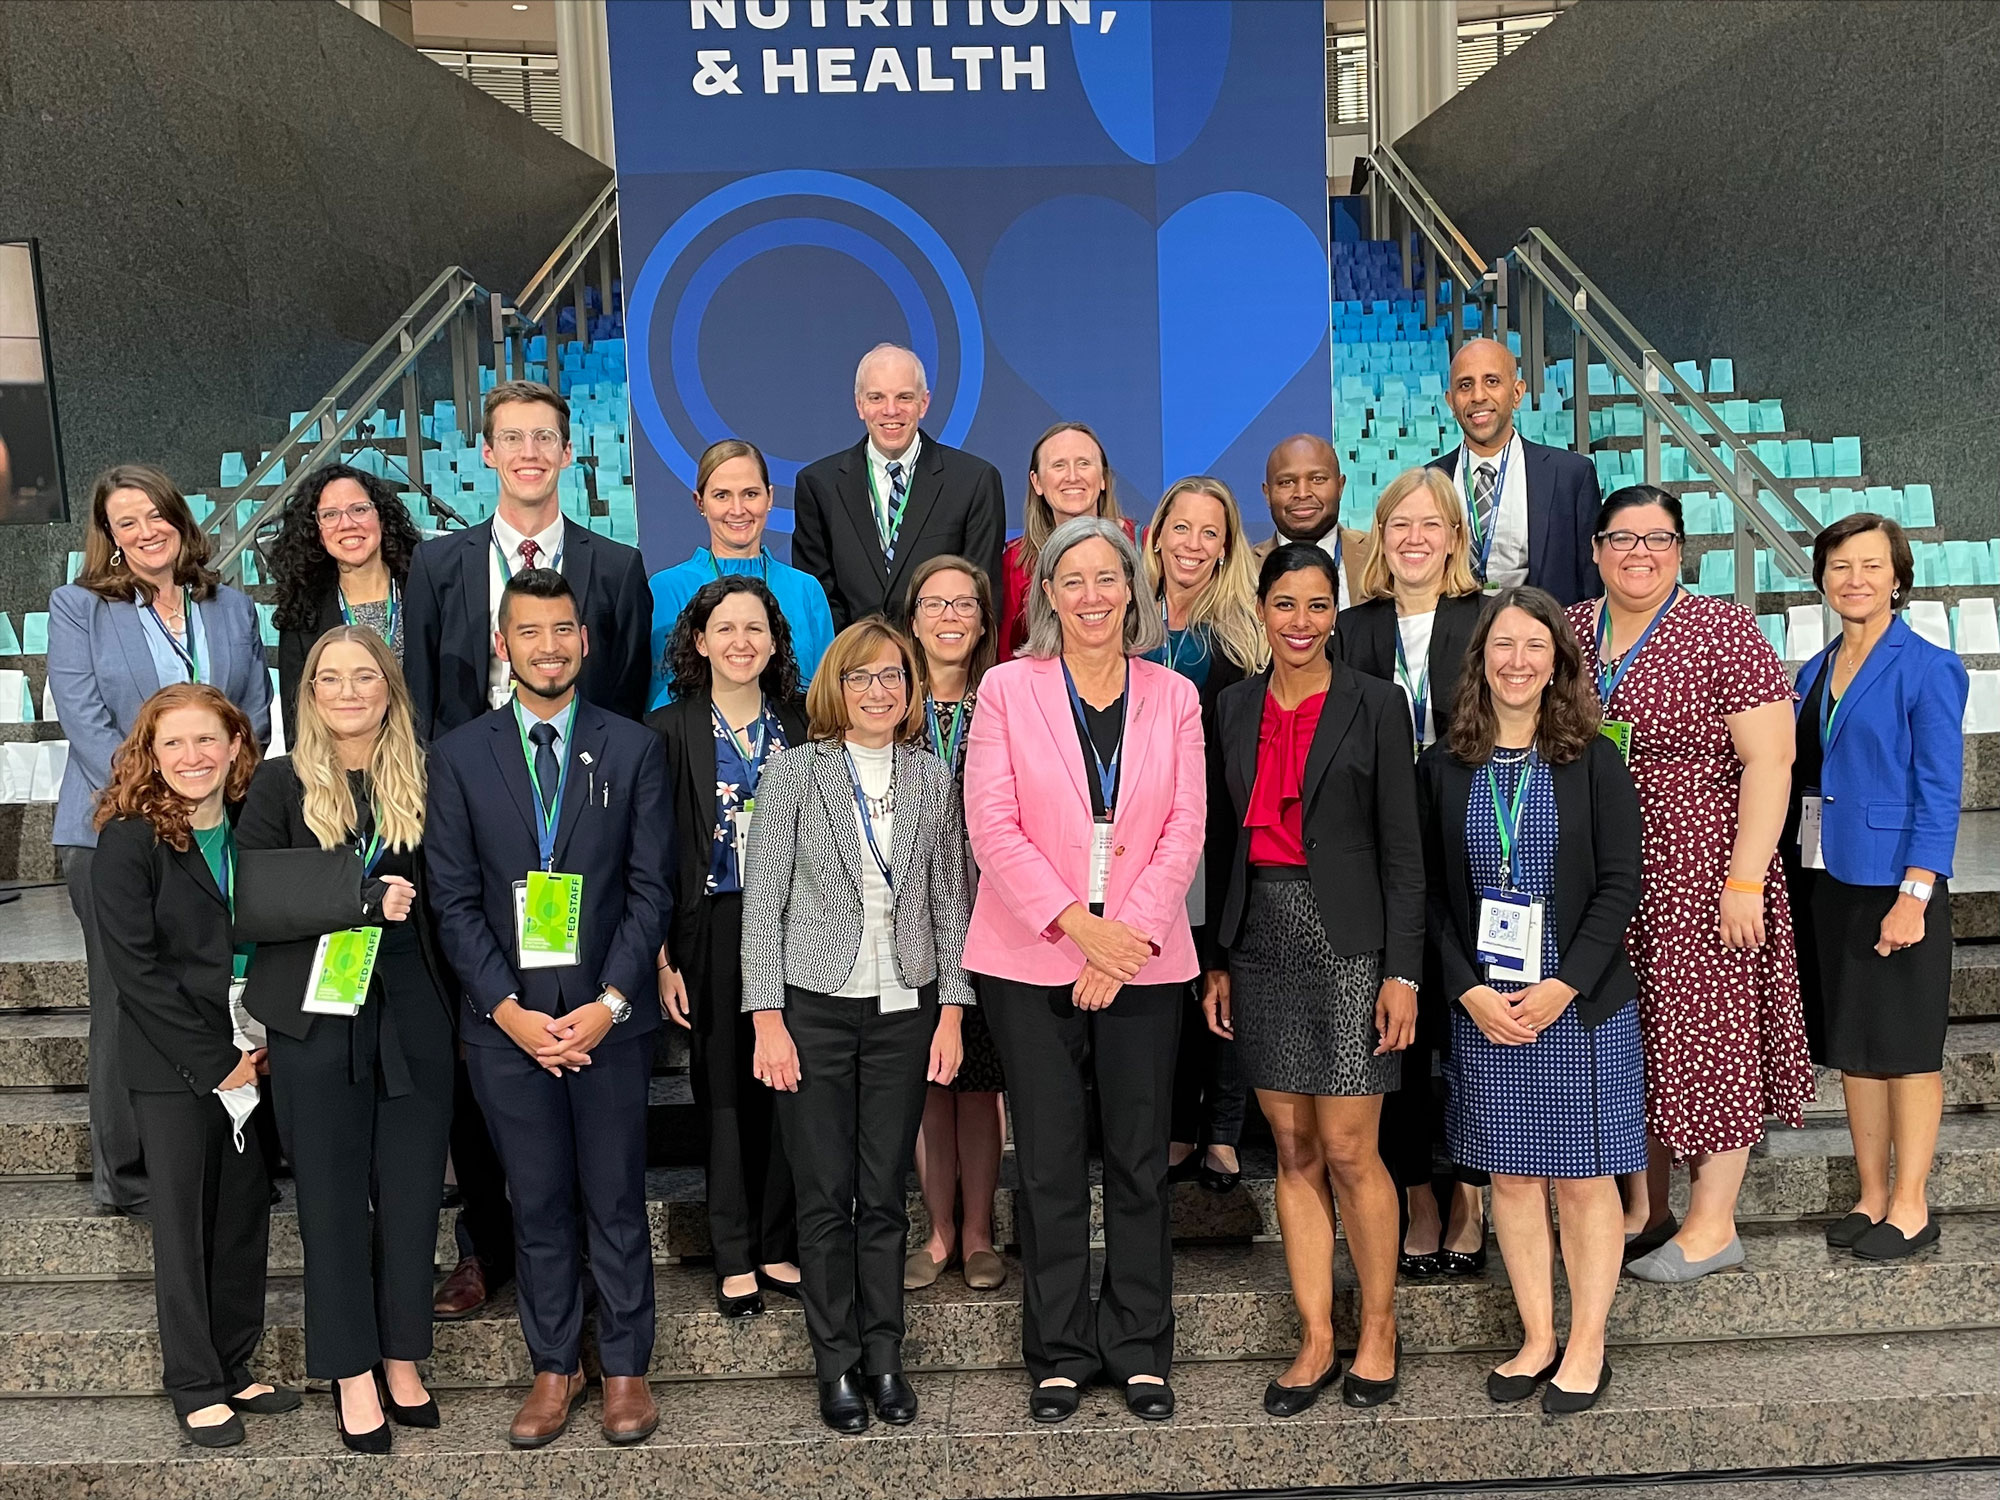 A group of 21 USDA Food and Nutrition Service employees dressed in professional attire and wearing conference badges pose together on a marble staircase in front of a blue conference banner at the White House Conference on Hunger, Nutrition, and Health